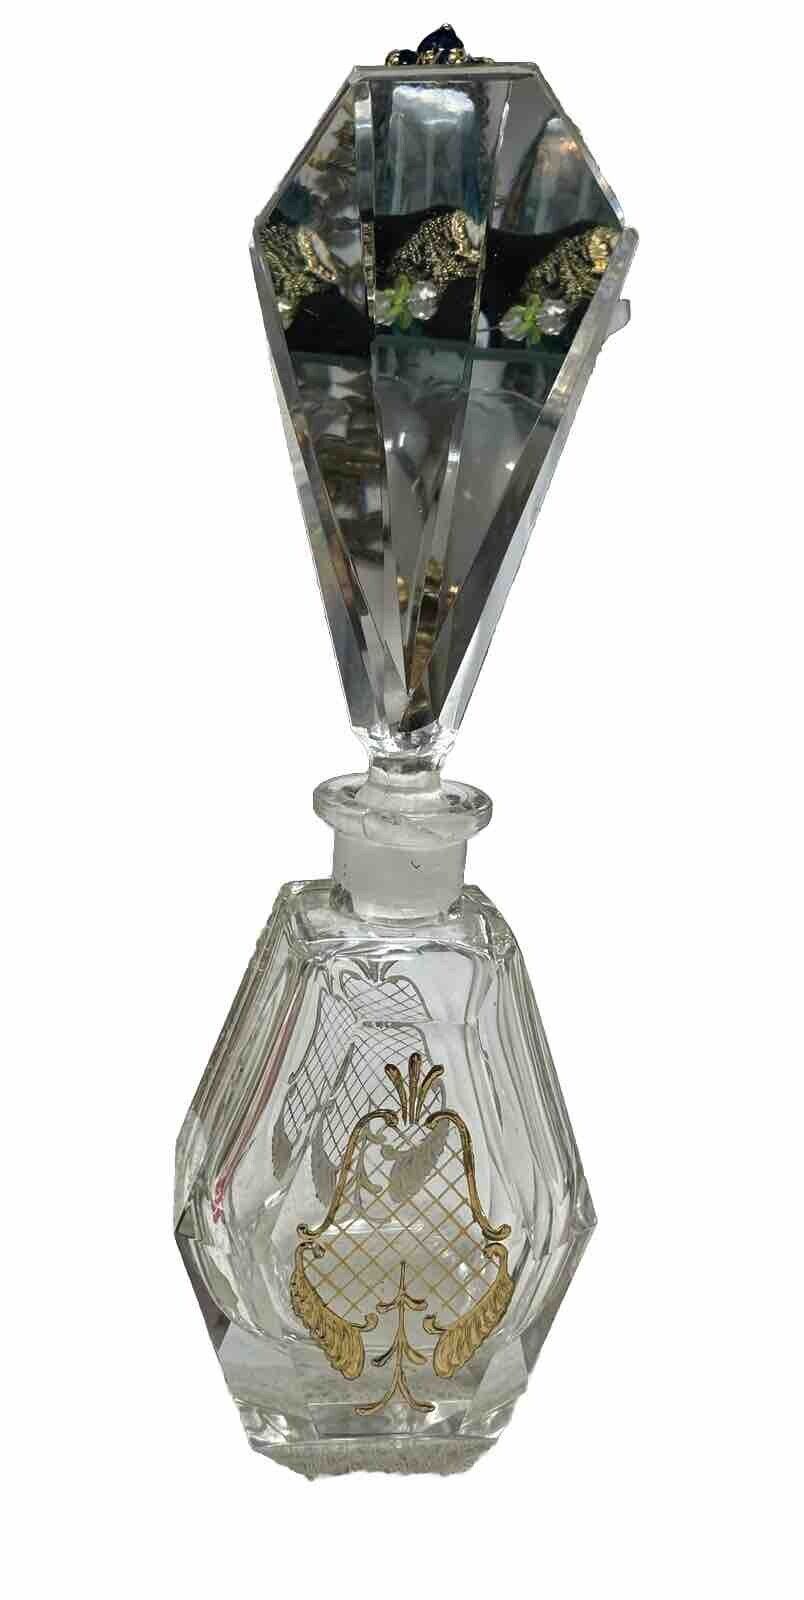 VINTAGE Ornate Crystal Glass Perfume Bottle with Gold Overlay